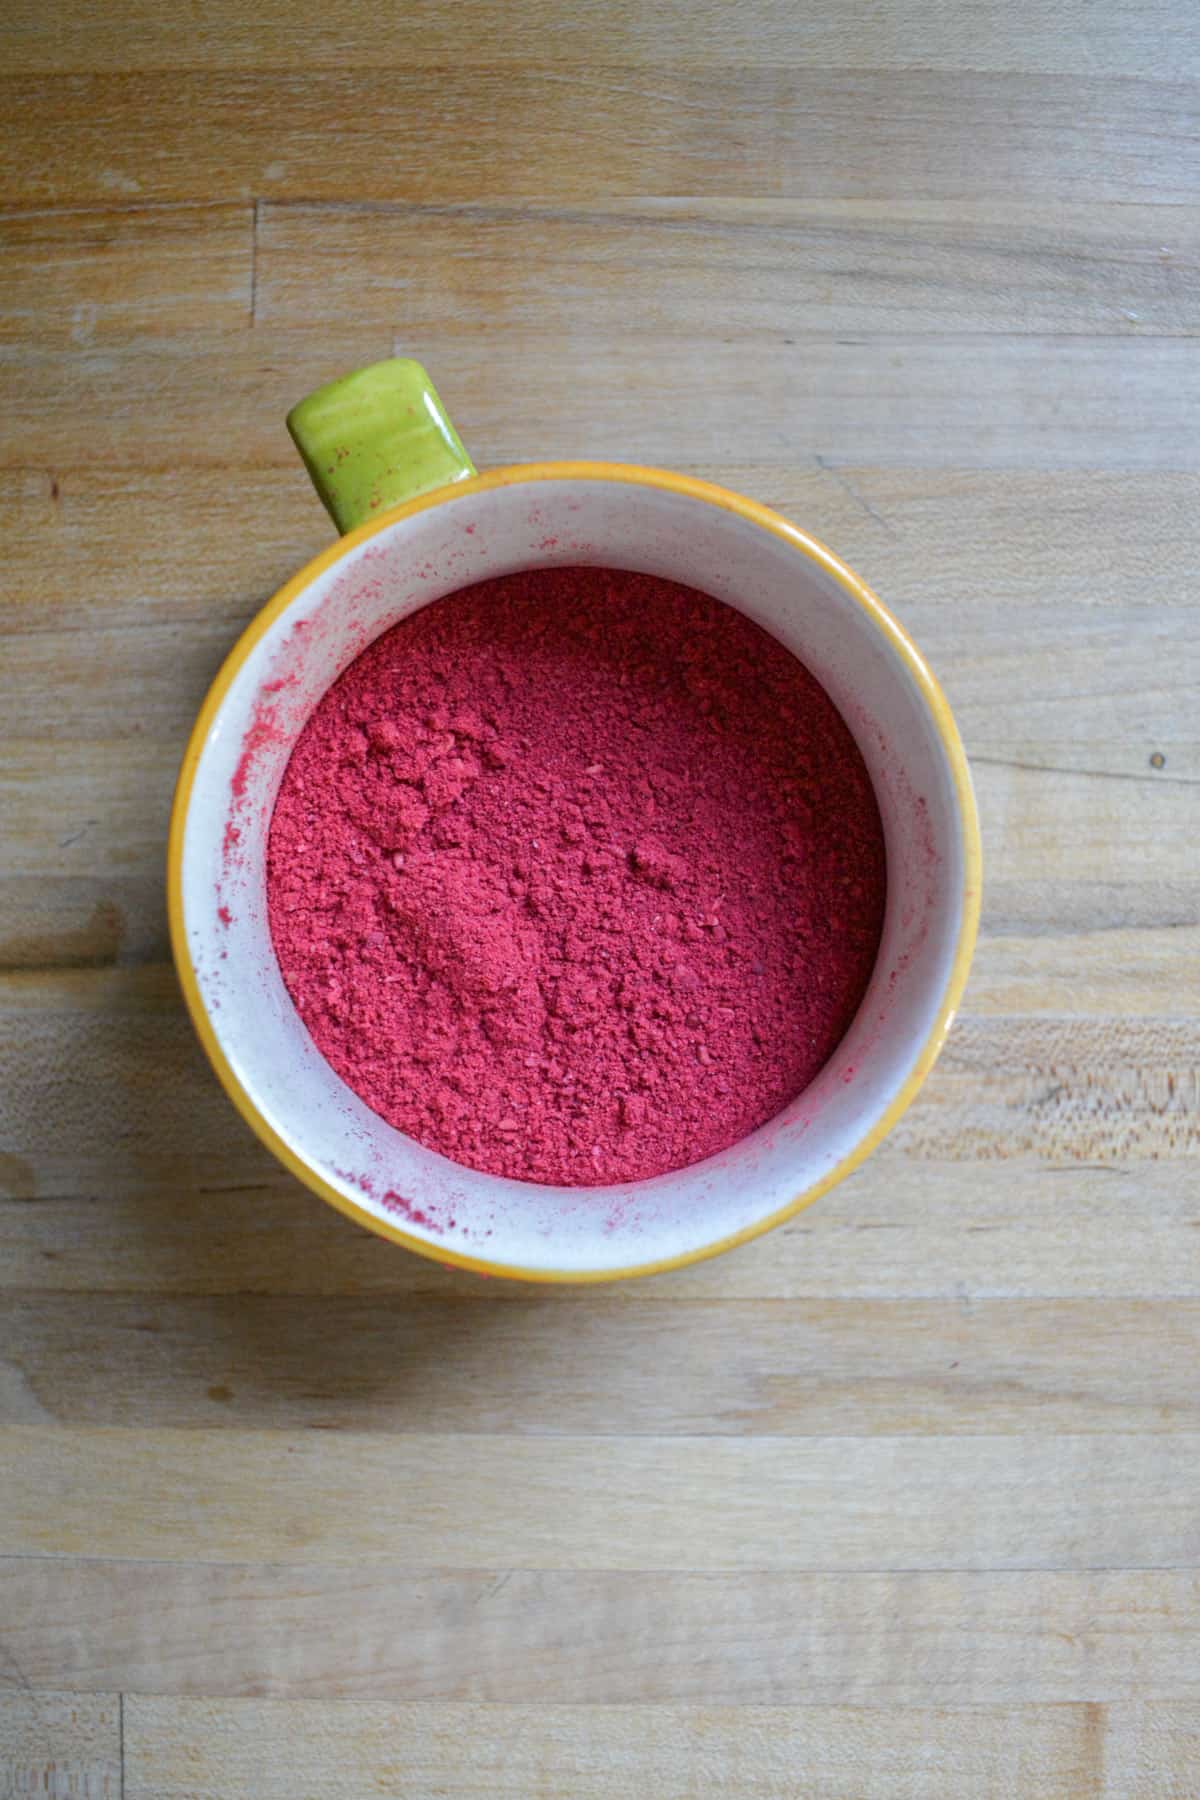 crushed freeze dried raspberries in a small cup